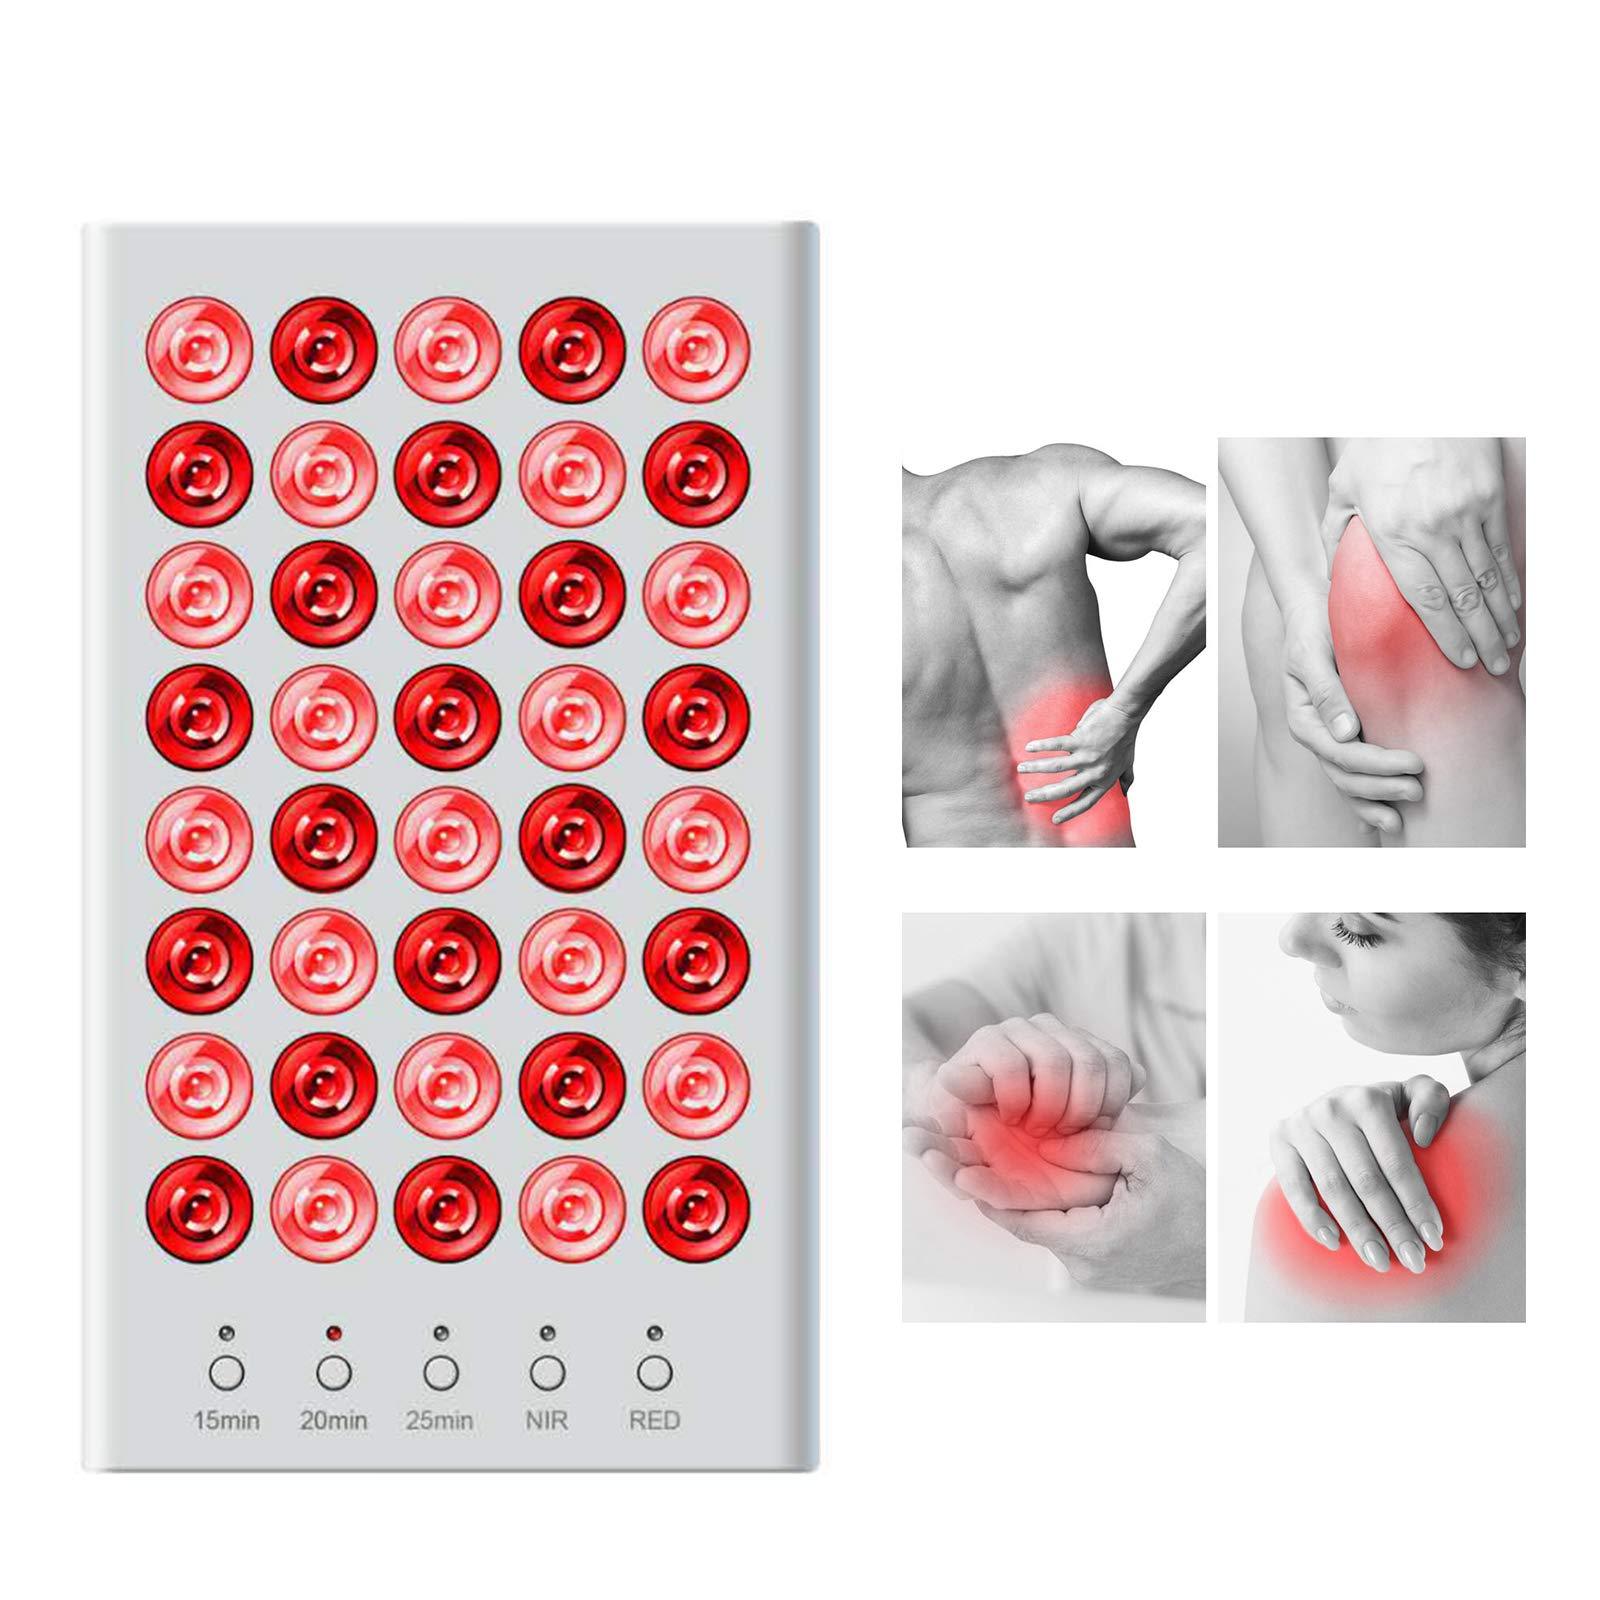 LED Infrared Therapy Panel